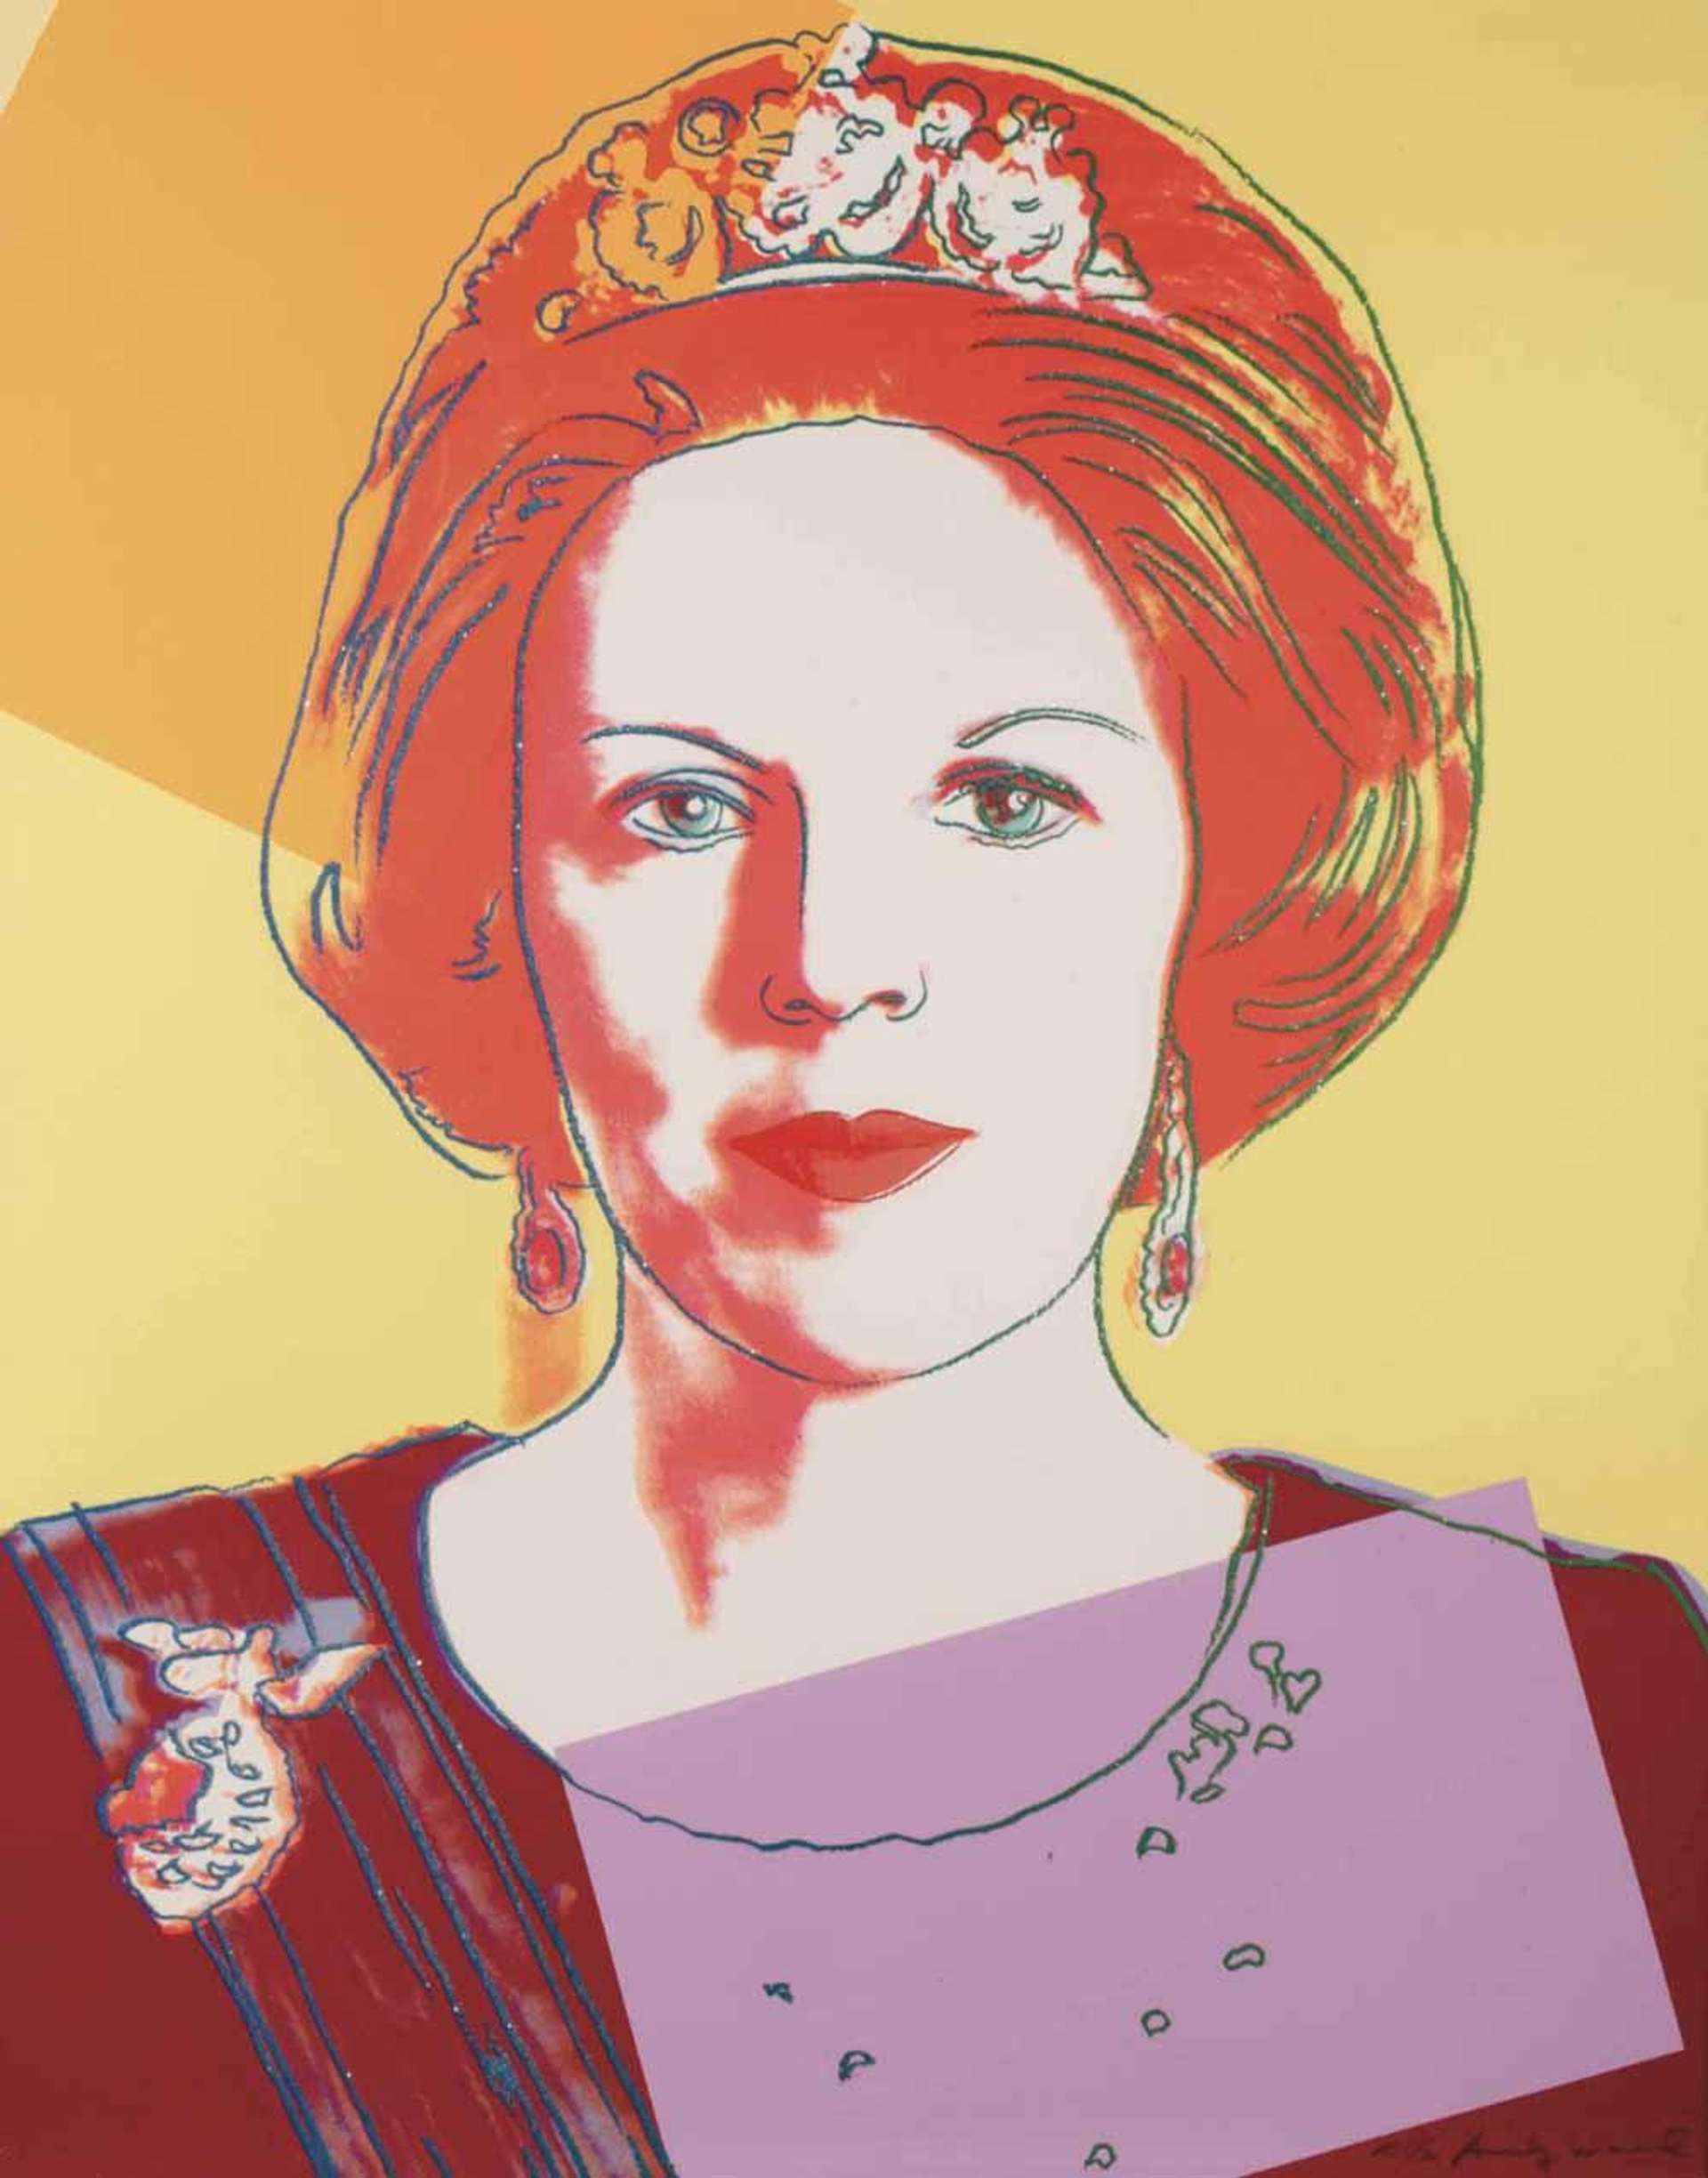 Queen Beatrix Of The Netherlands Royal Edition (F. & S. II.341A) - Signed Print by Andy Warhol 1985 - MyArtBroker